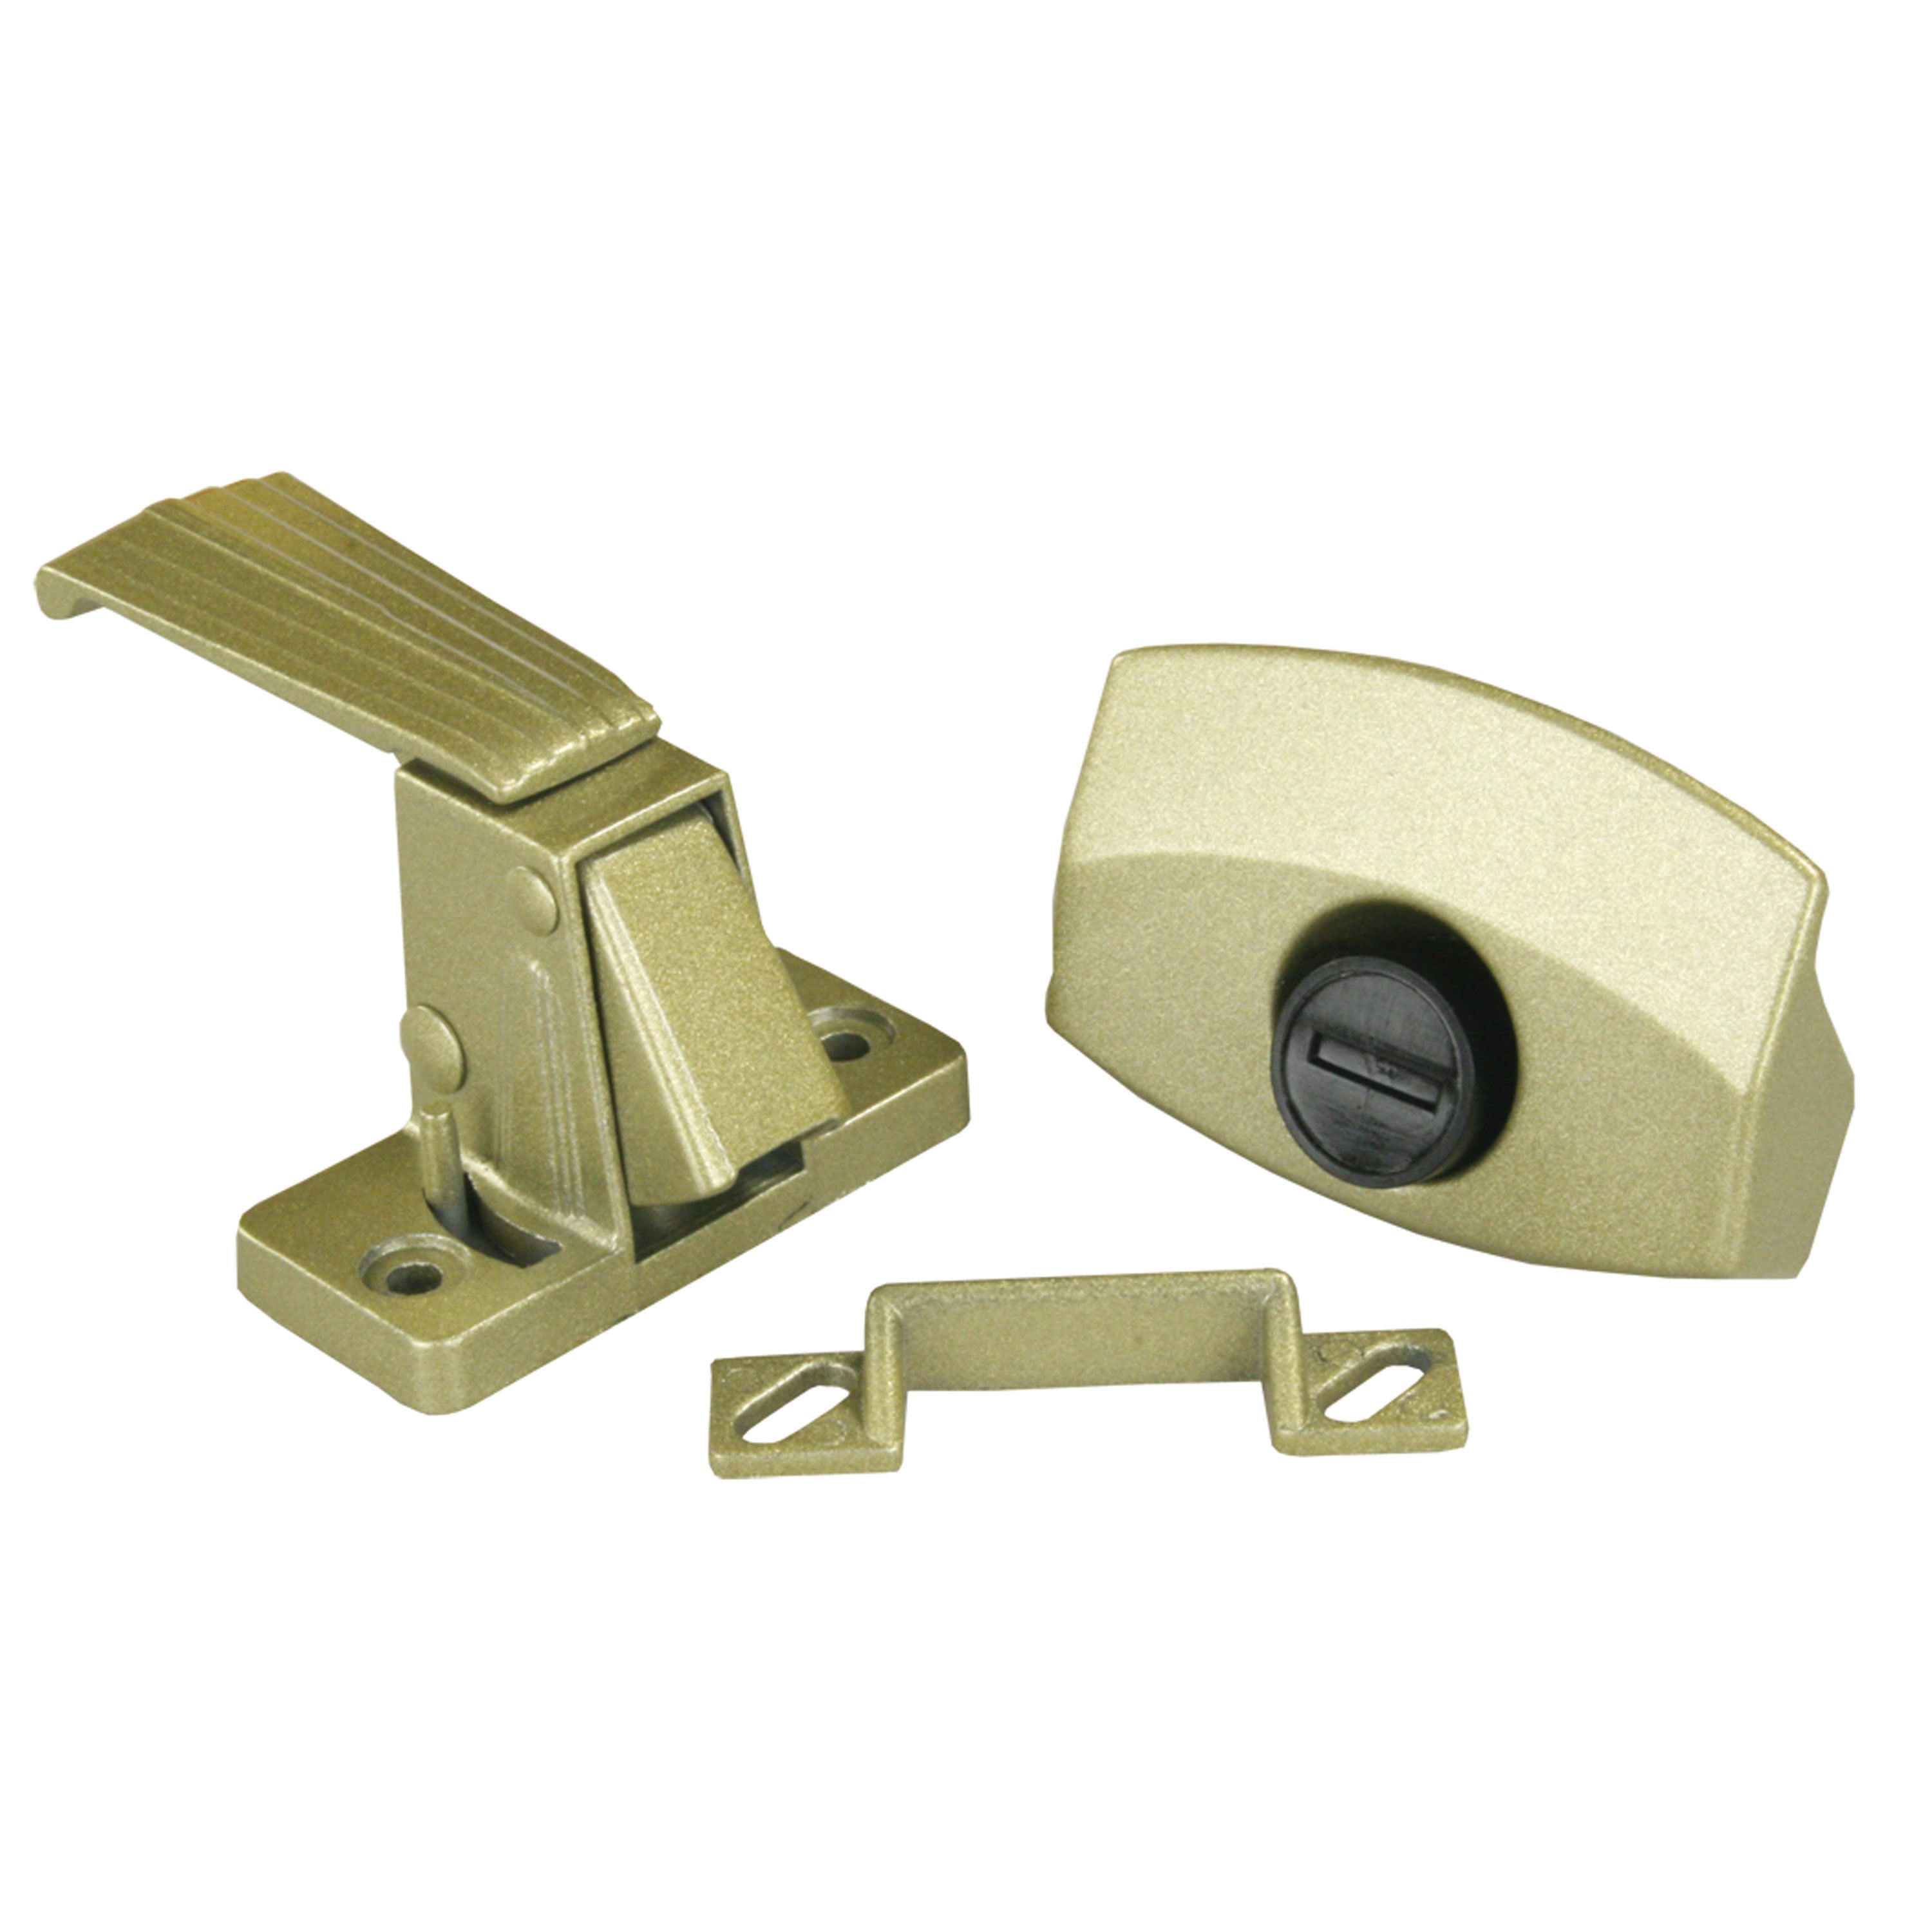 JR Products 20515 Non-Locking Privacy Latch - Gold